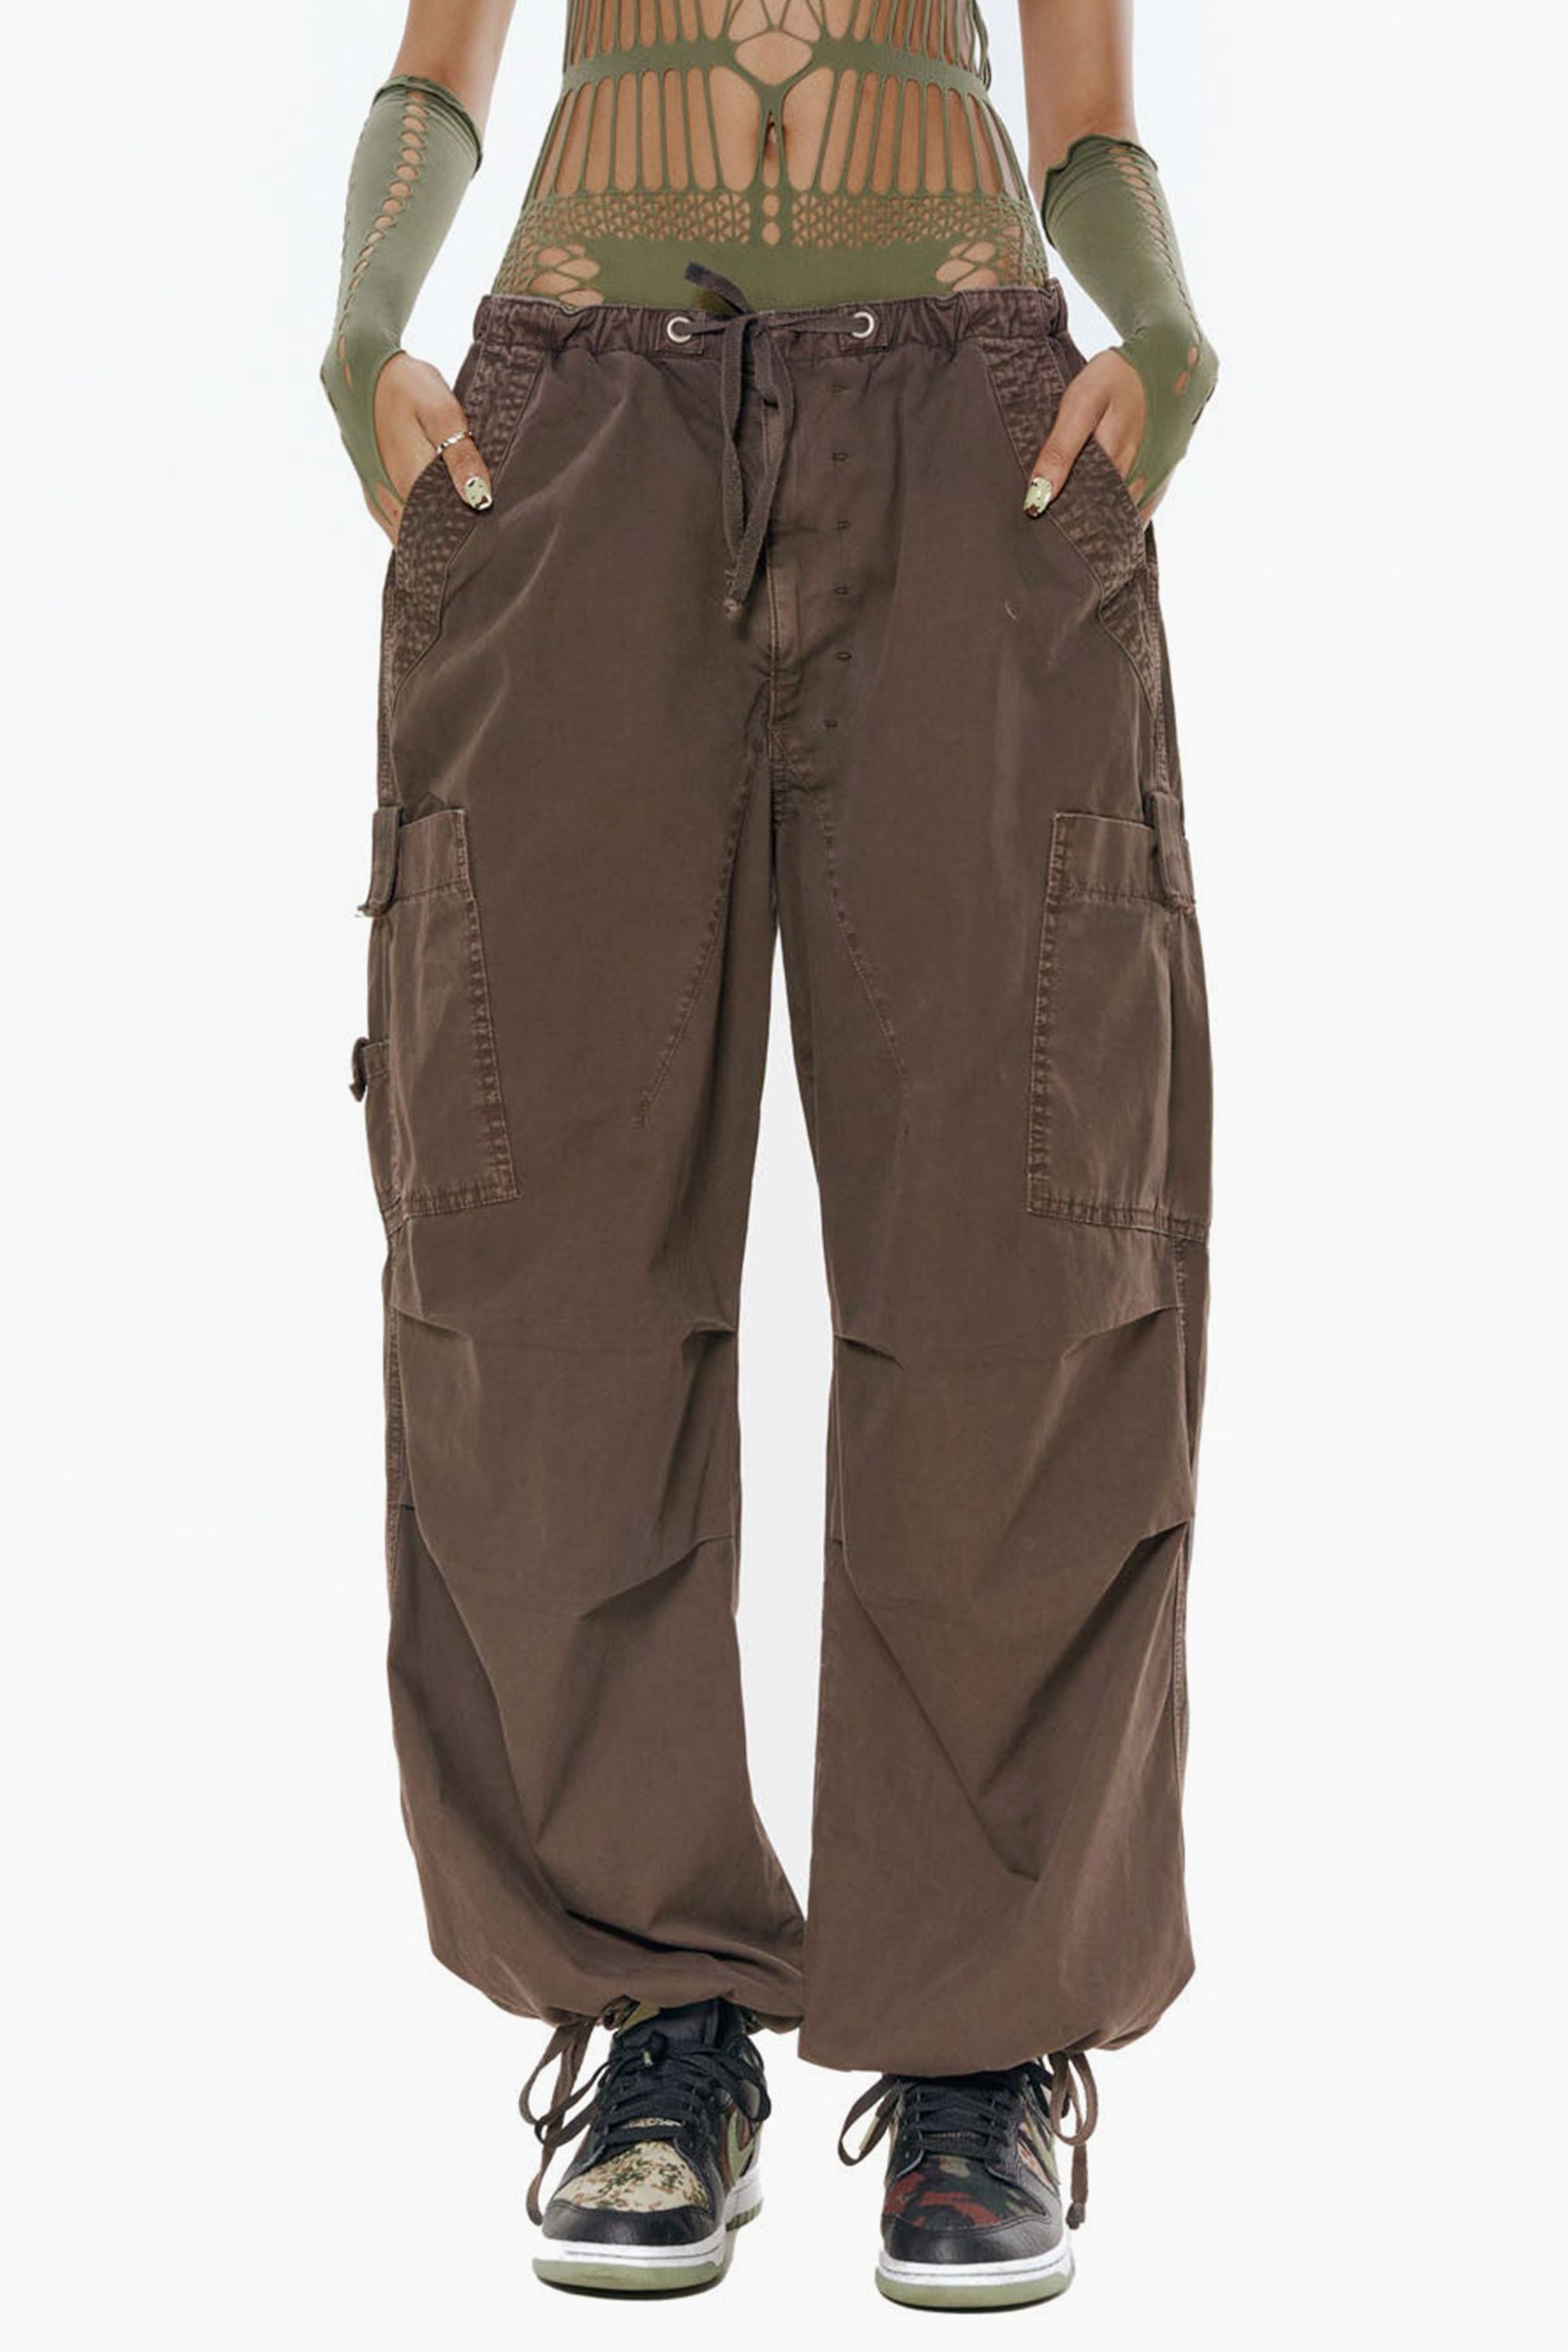 Transition Your Hot Girl Summer to Fall With These Cargo Pants